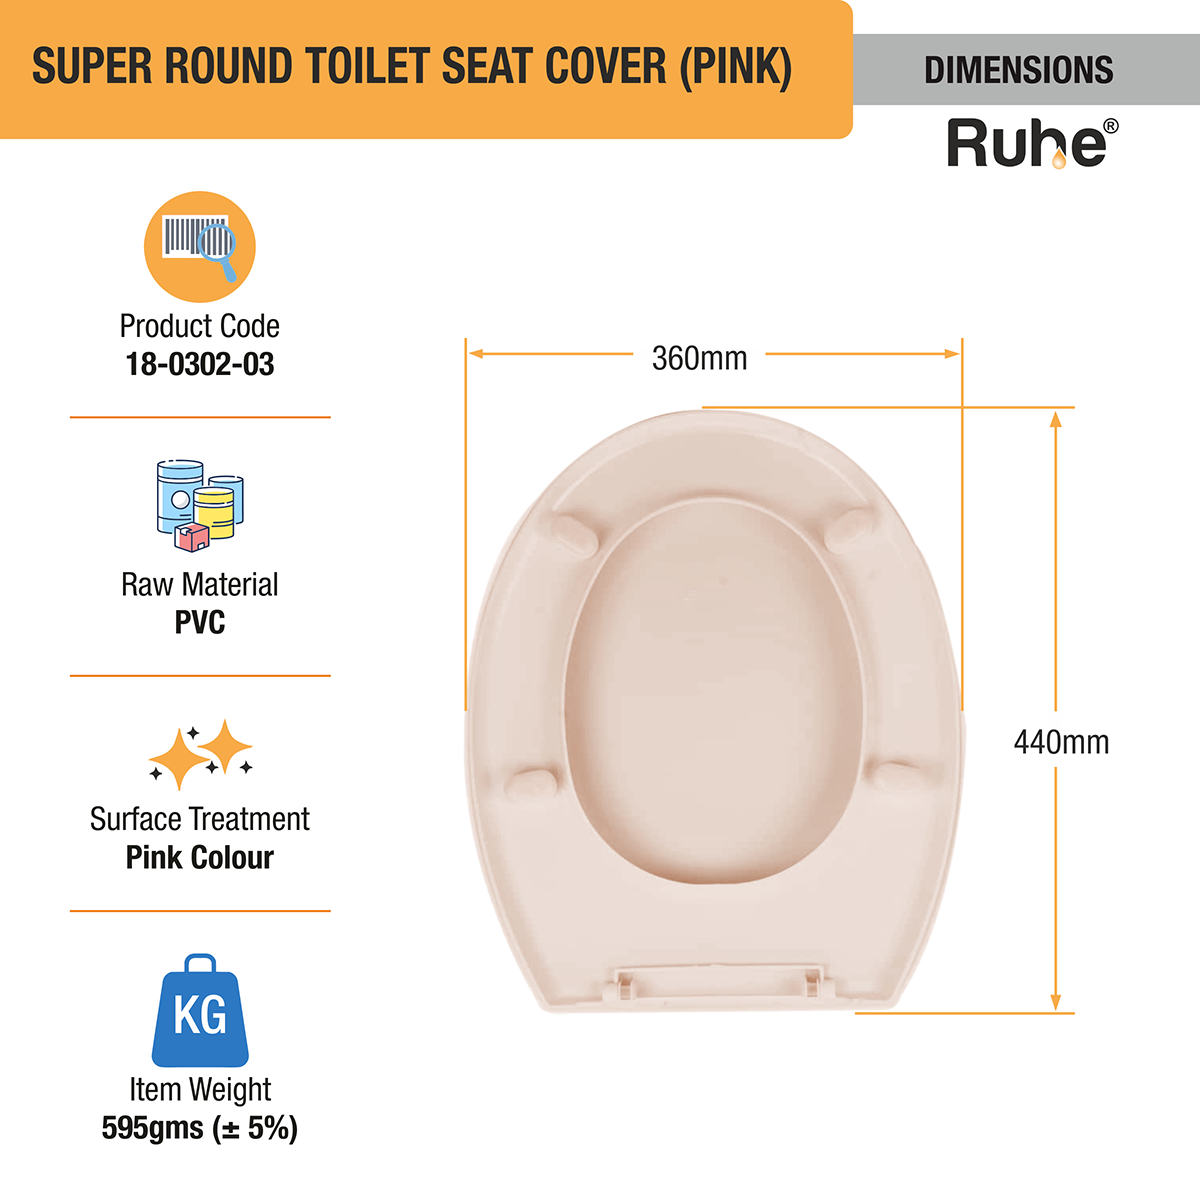 Super Round Toilet Seat Cover (Pink) dimensions and sizes